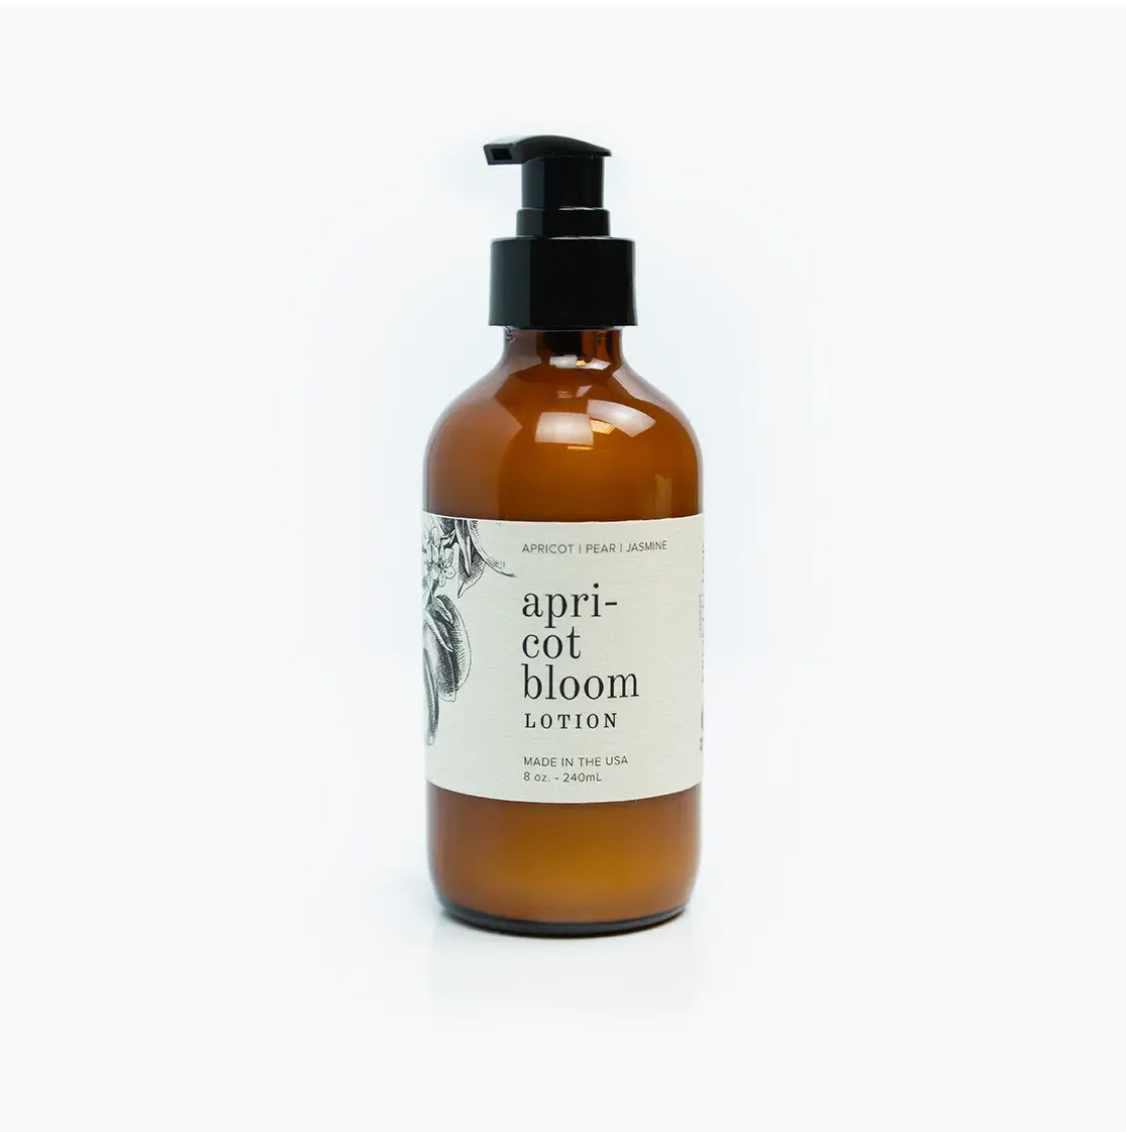 Amber glass bottle with a black pump containing Faire's "Apricot Bloom Lotion 8 oz." The label features an artistic floral sketch and text noting the product is made in Arizona. The background is plain white.